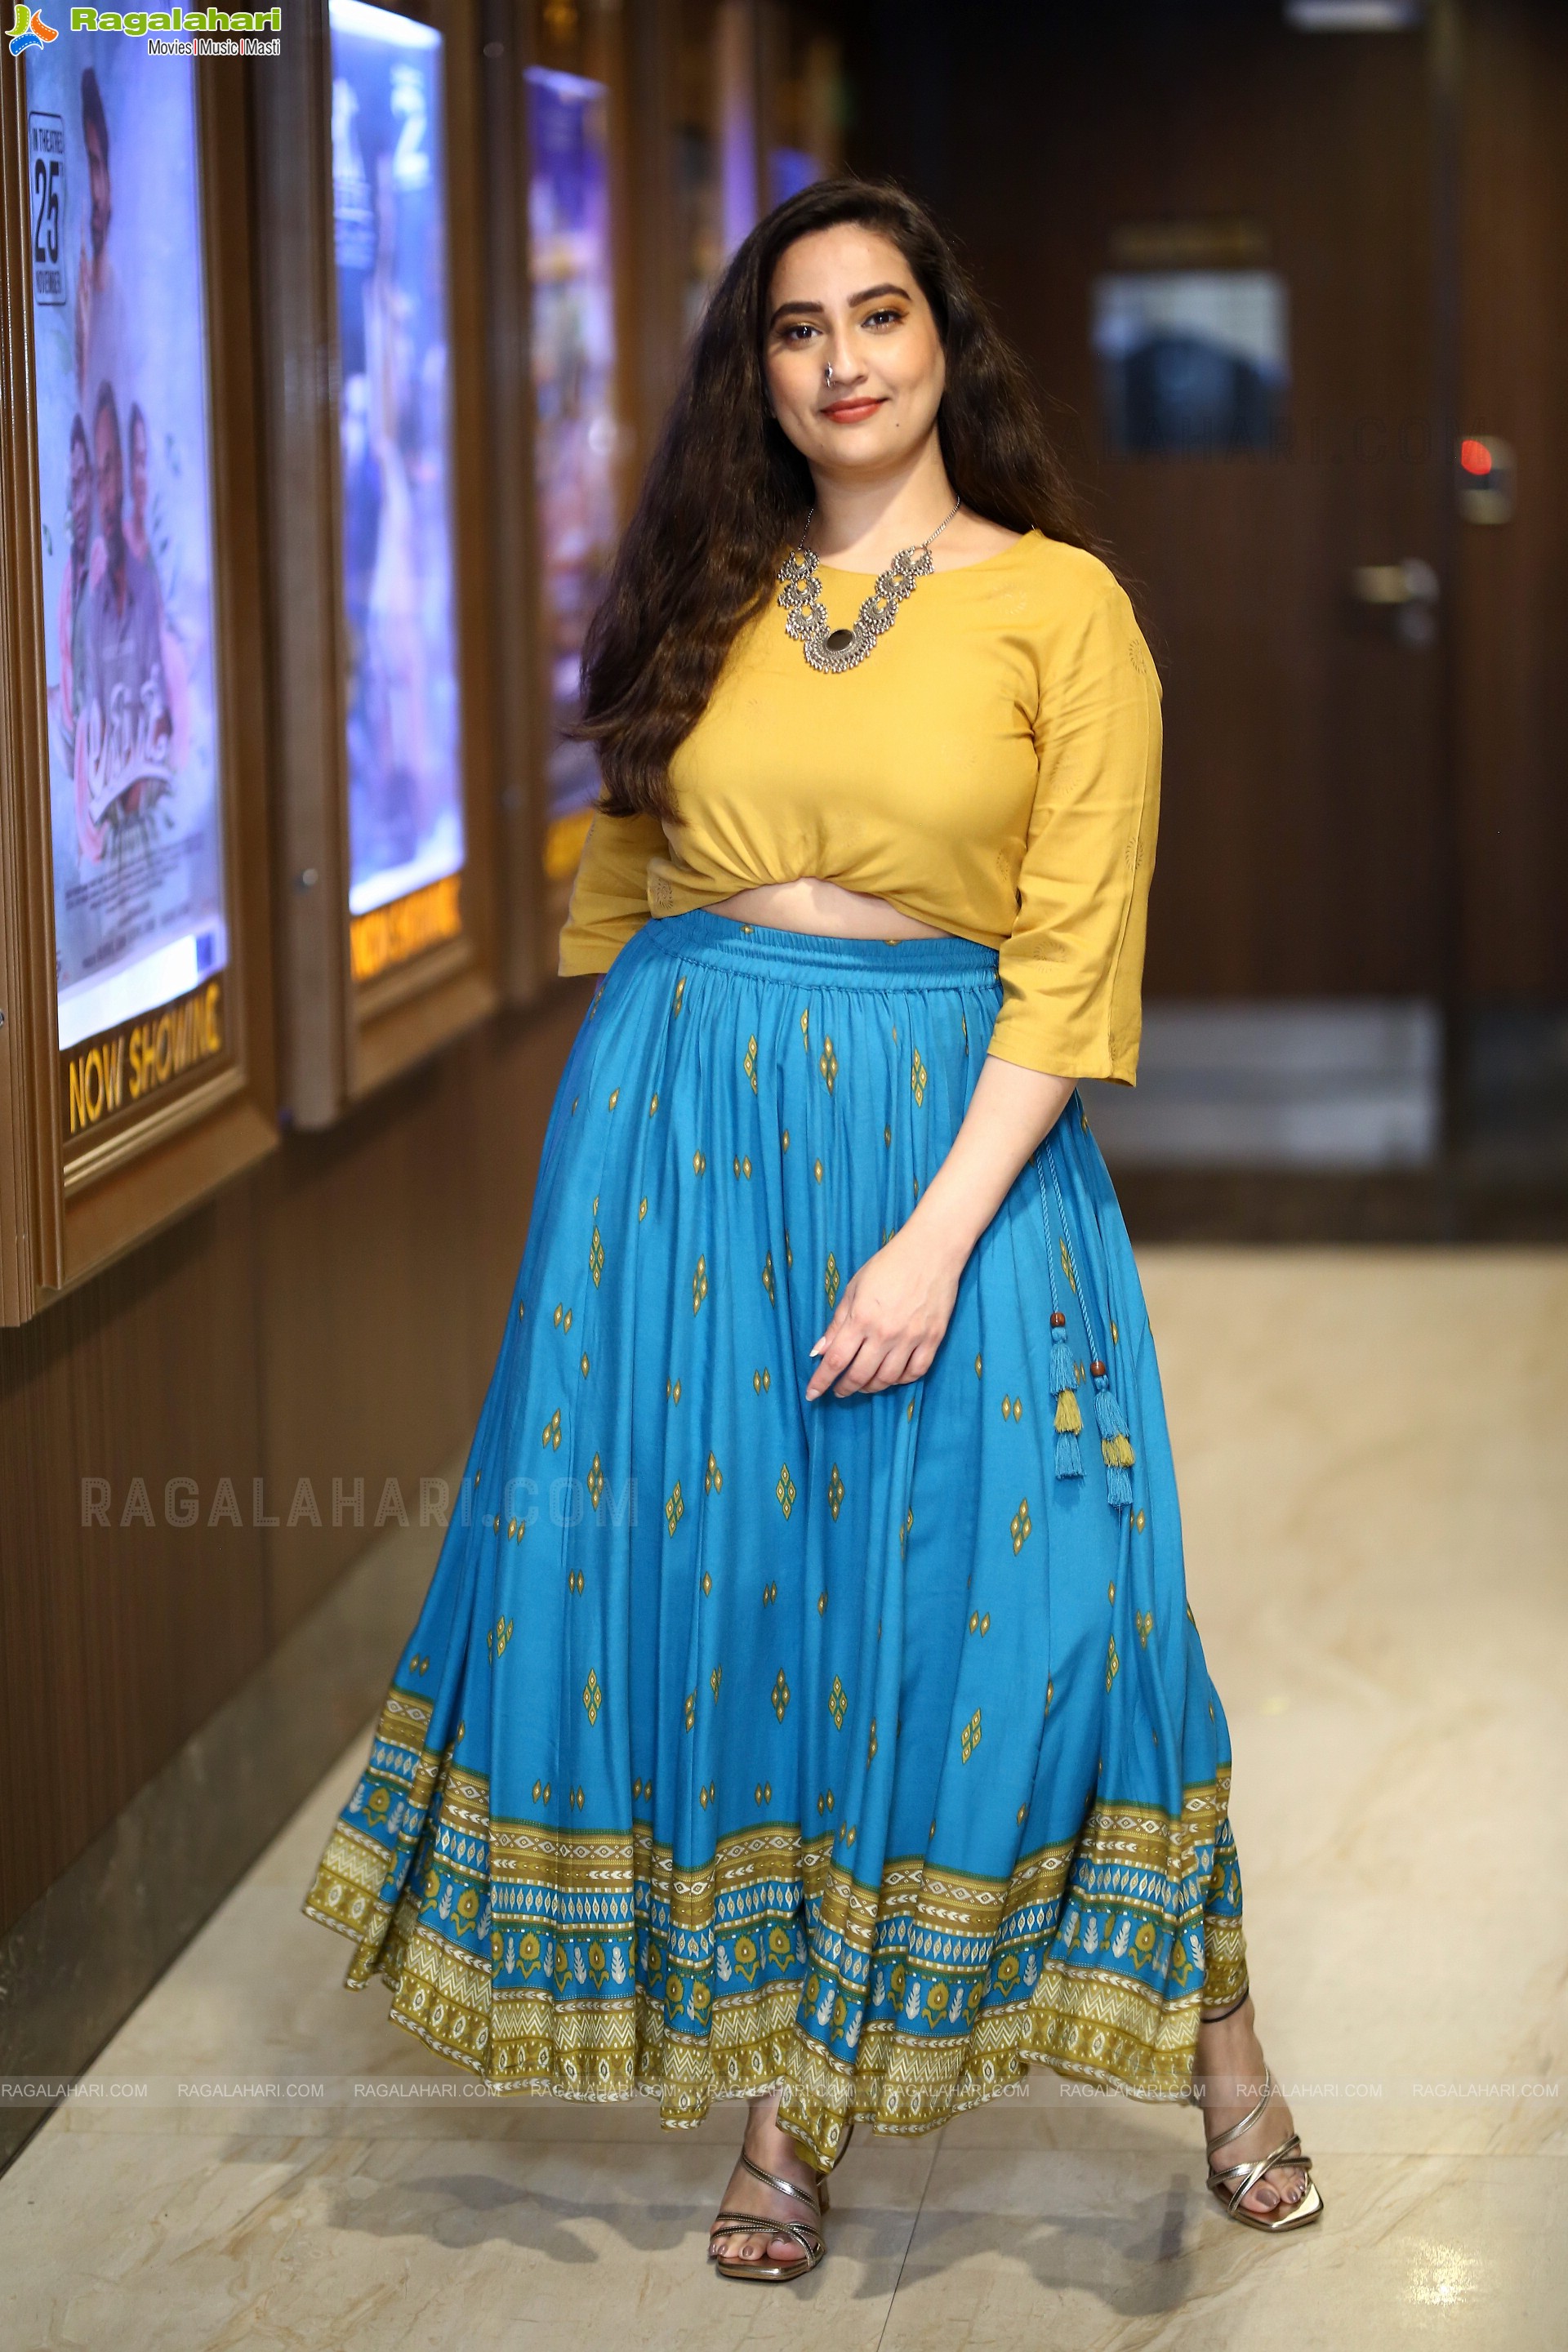 Anchor Manjusha at 18 Pages Movie Trailer Launch, HD Photo Gallery